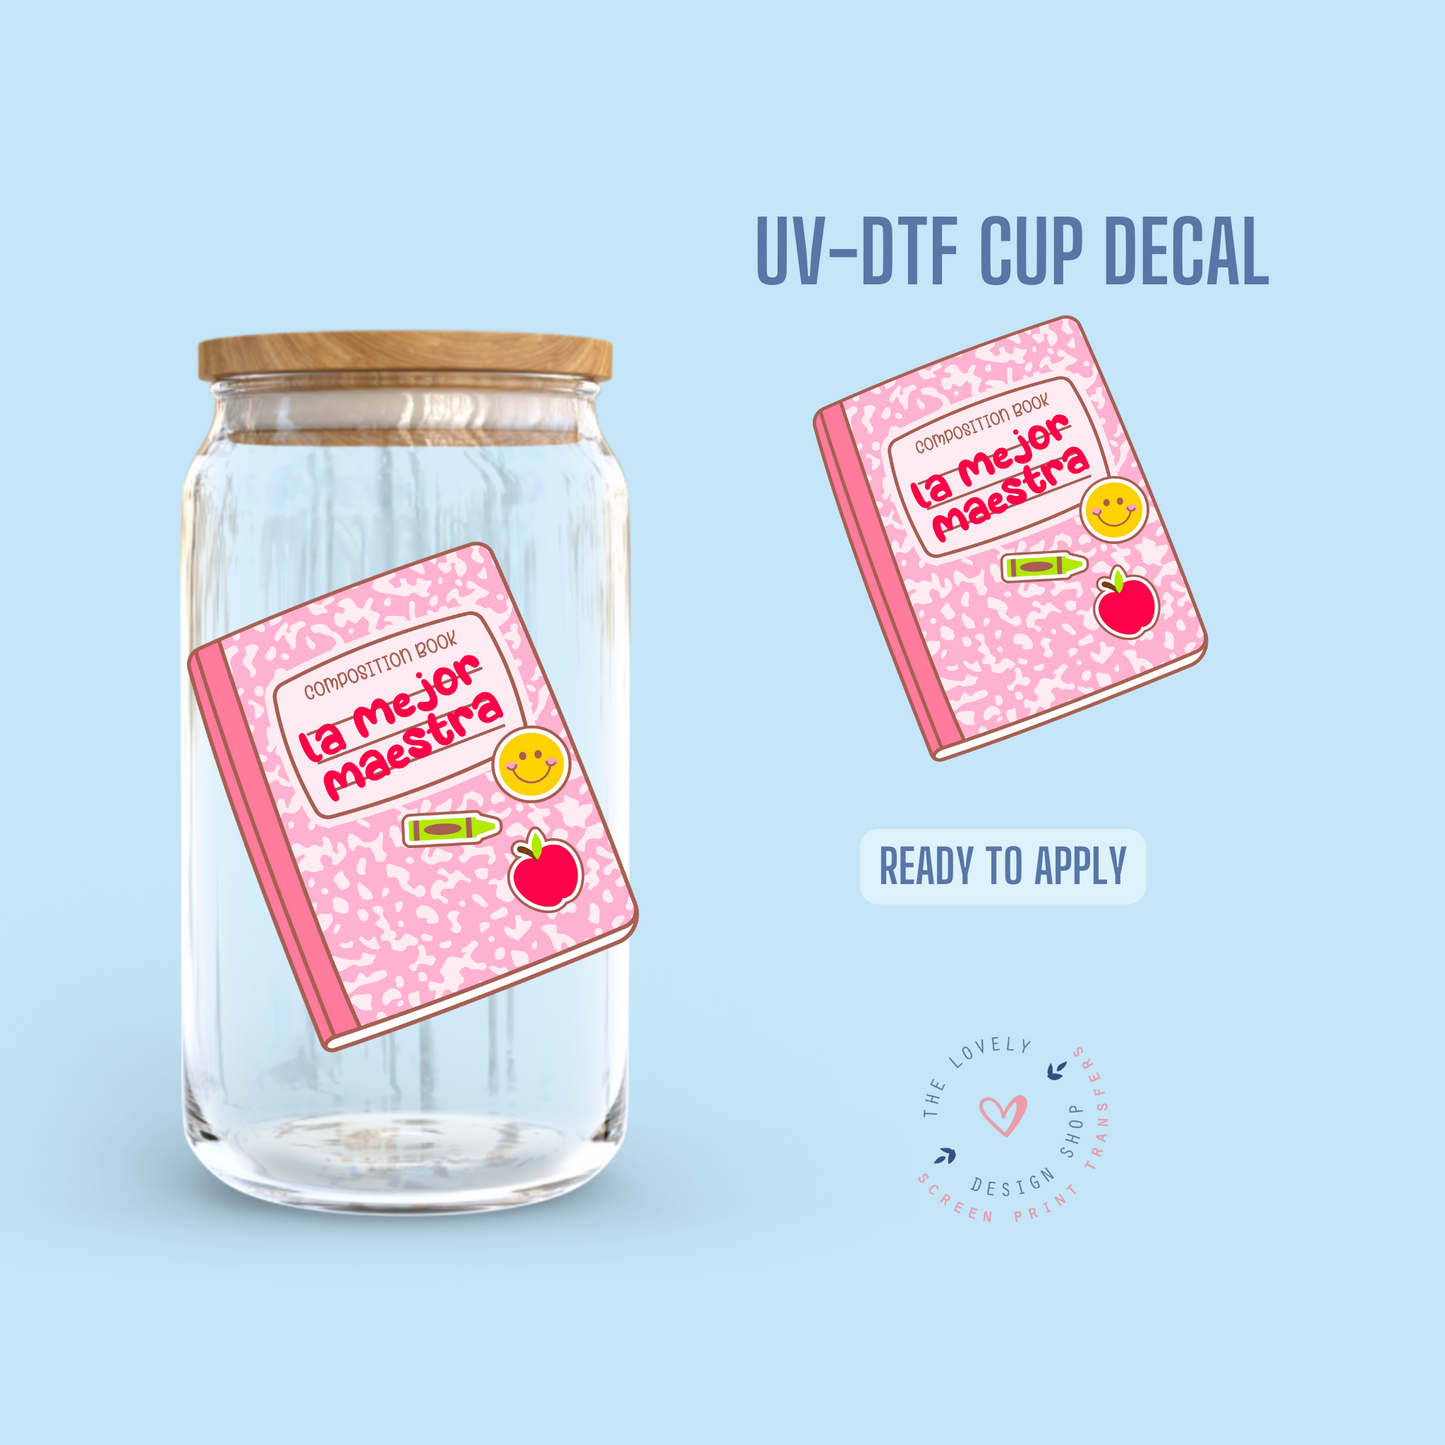 La Mejor Maestra - UV DTF Cup Decal (Ready to Ship) Apr 1